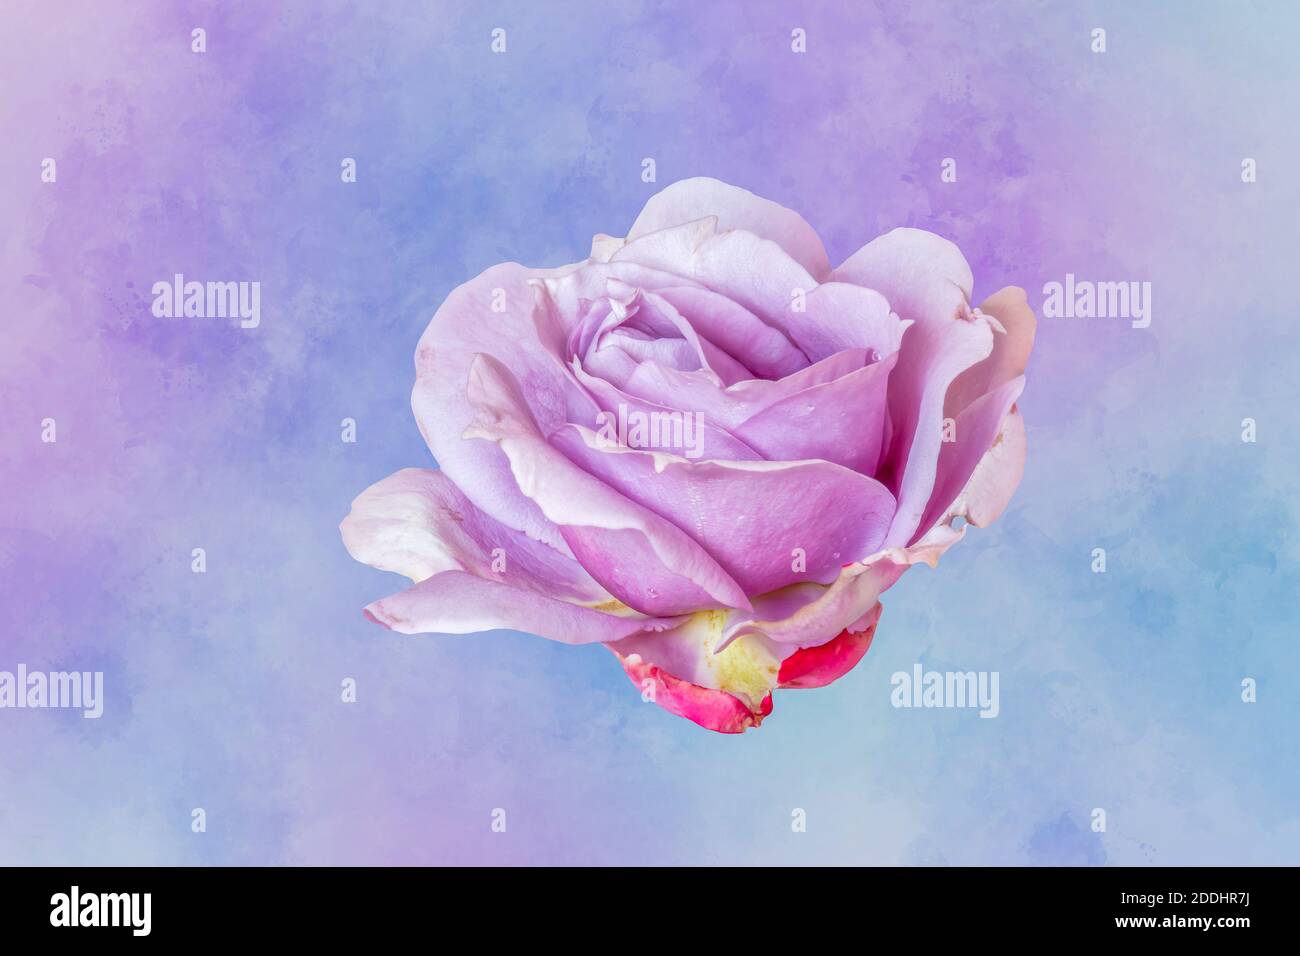 color macro of a single isolated violet red rose blossom with rain droplets,  on watercolor background in vintage painting style Stock Photo